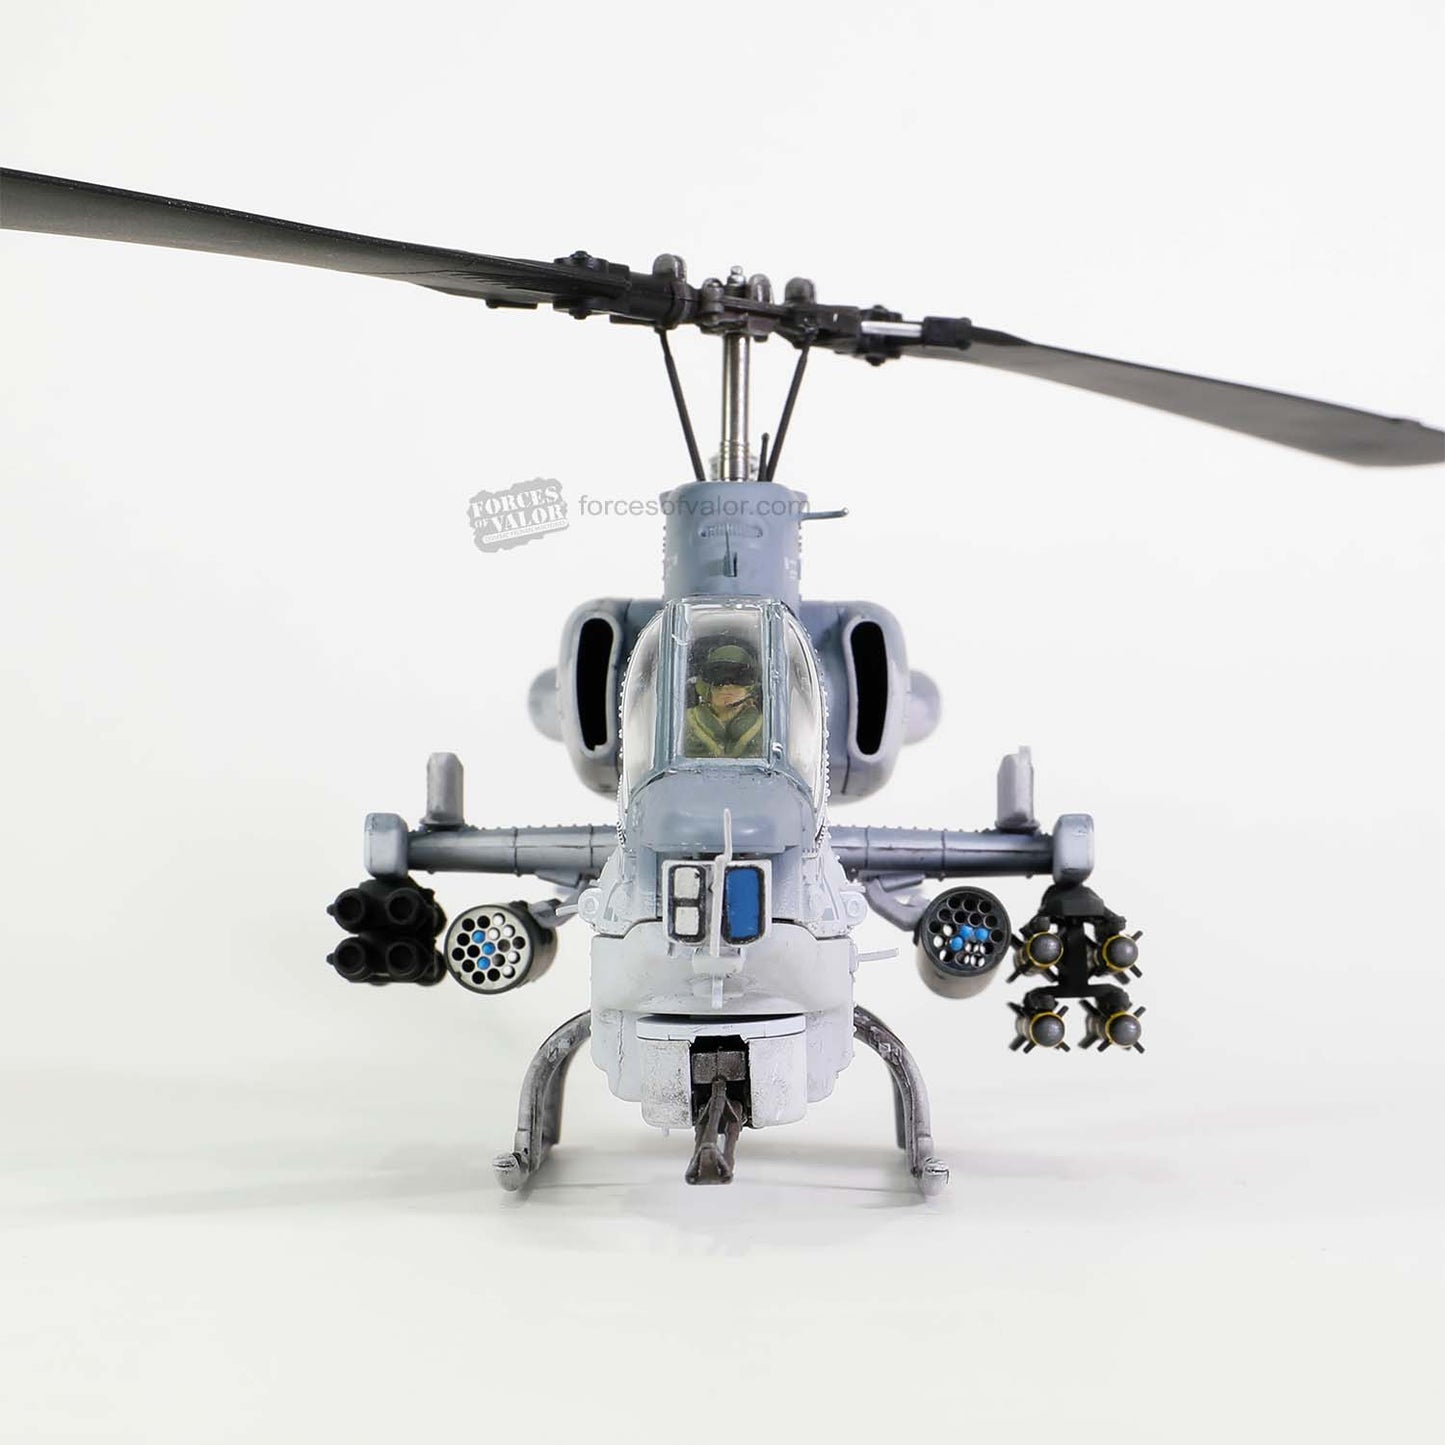 *1/48 U.S Marine Corps Bell AH-1W “Whiskey Cobra” Squadron 167 9/11 tribute Camp Bastion Afghanistan December 2012 Forces of Valor FOV-820004A-2